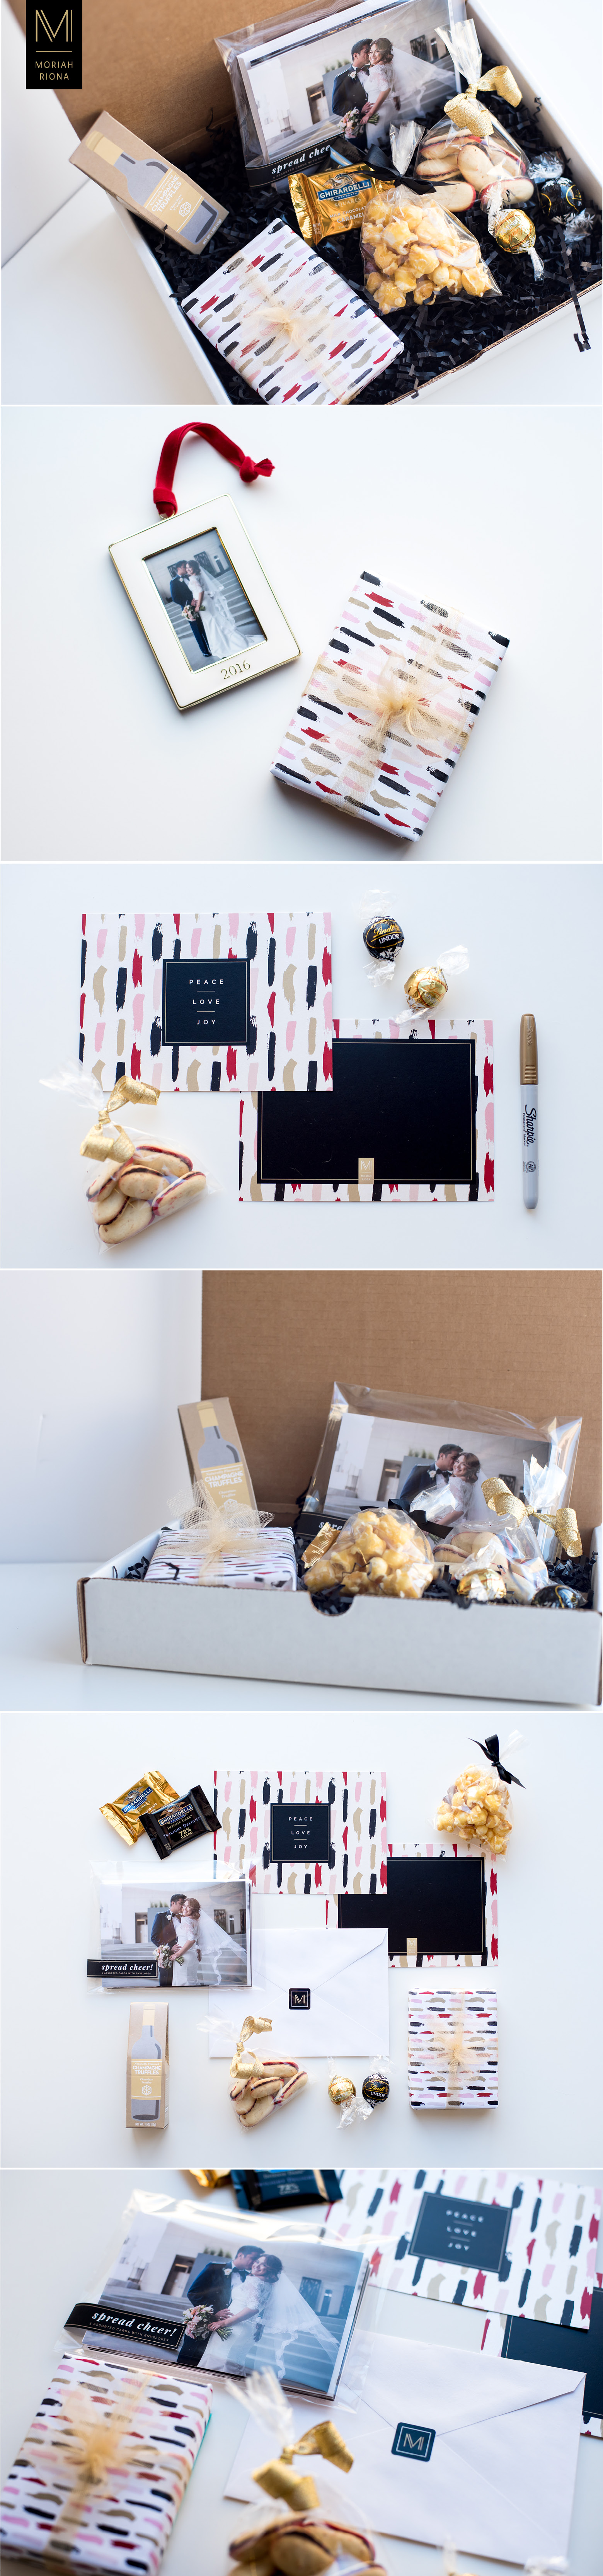 Branded holiday gift boxes for wedding photography clients by Moriah Riona. Branding for photographers. Luxurious and glamorous custom designed gifts and holiday packaging in brand colors, black, gold and blush.